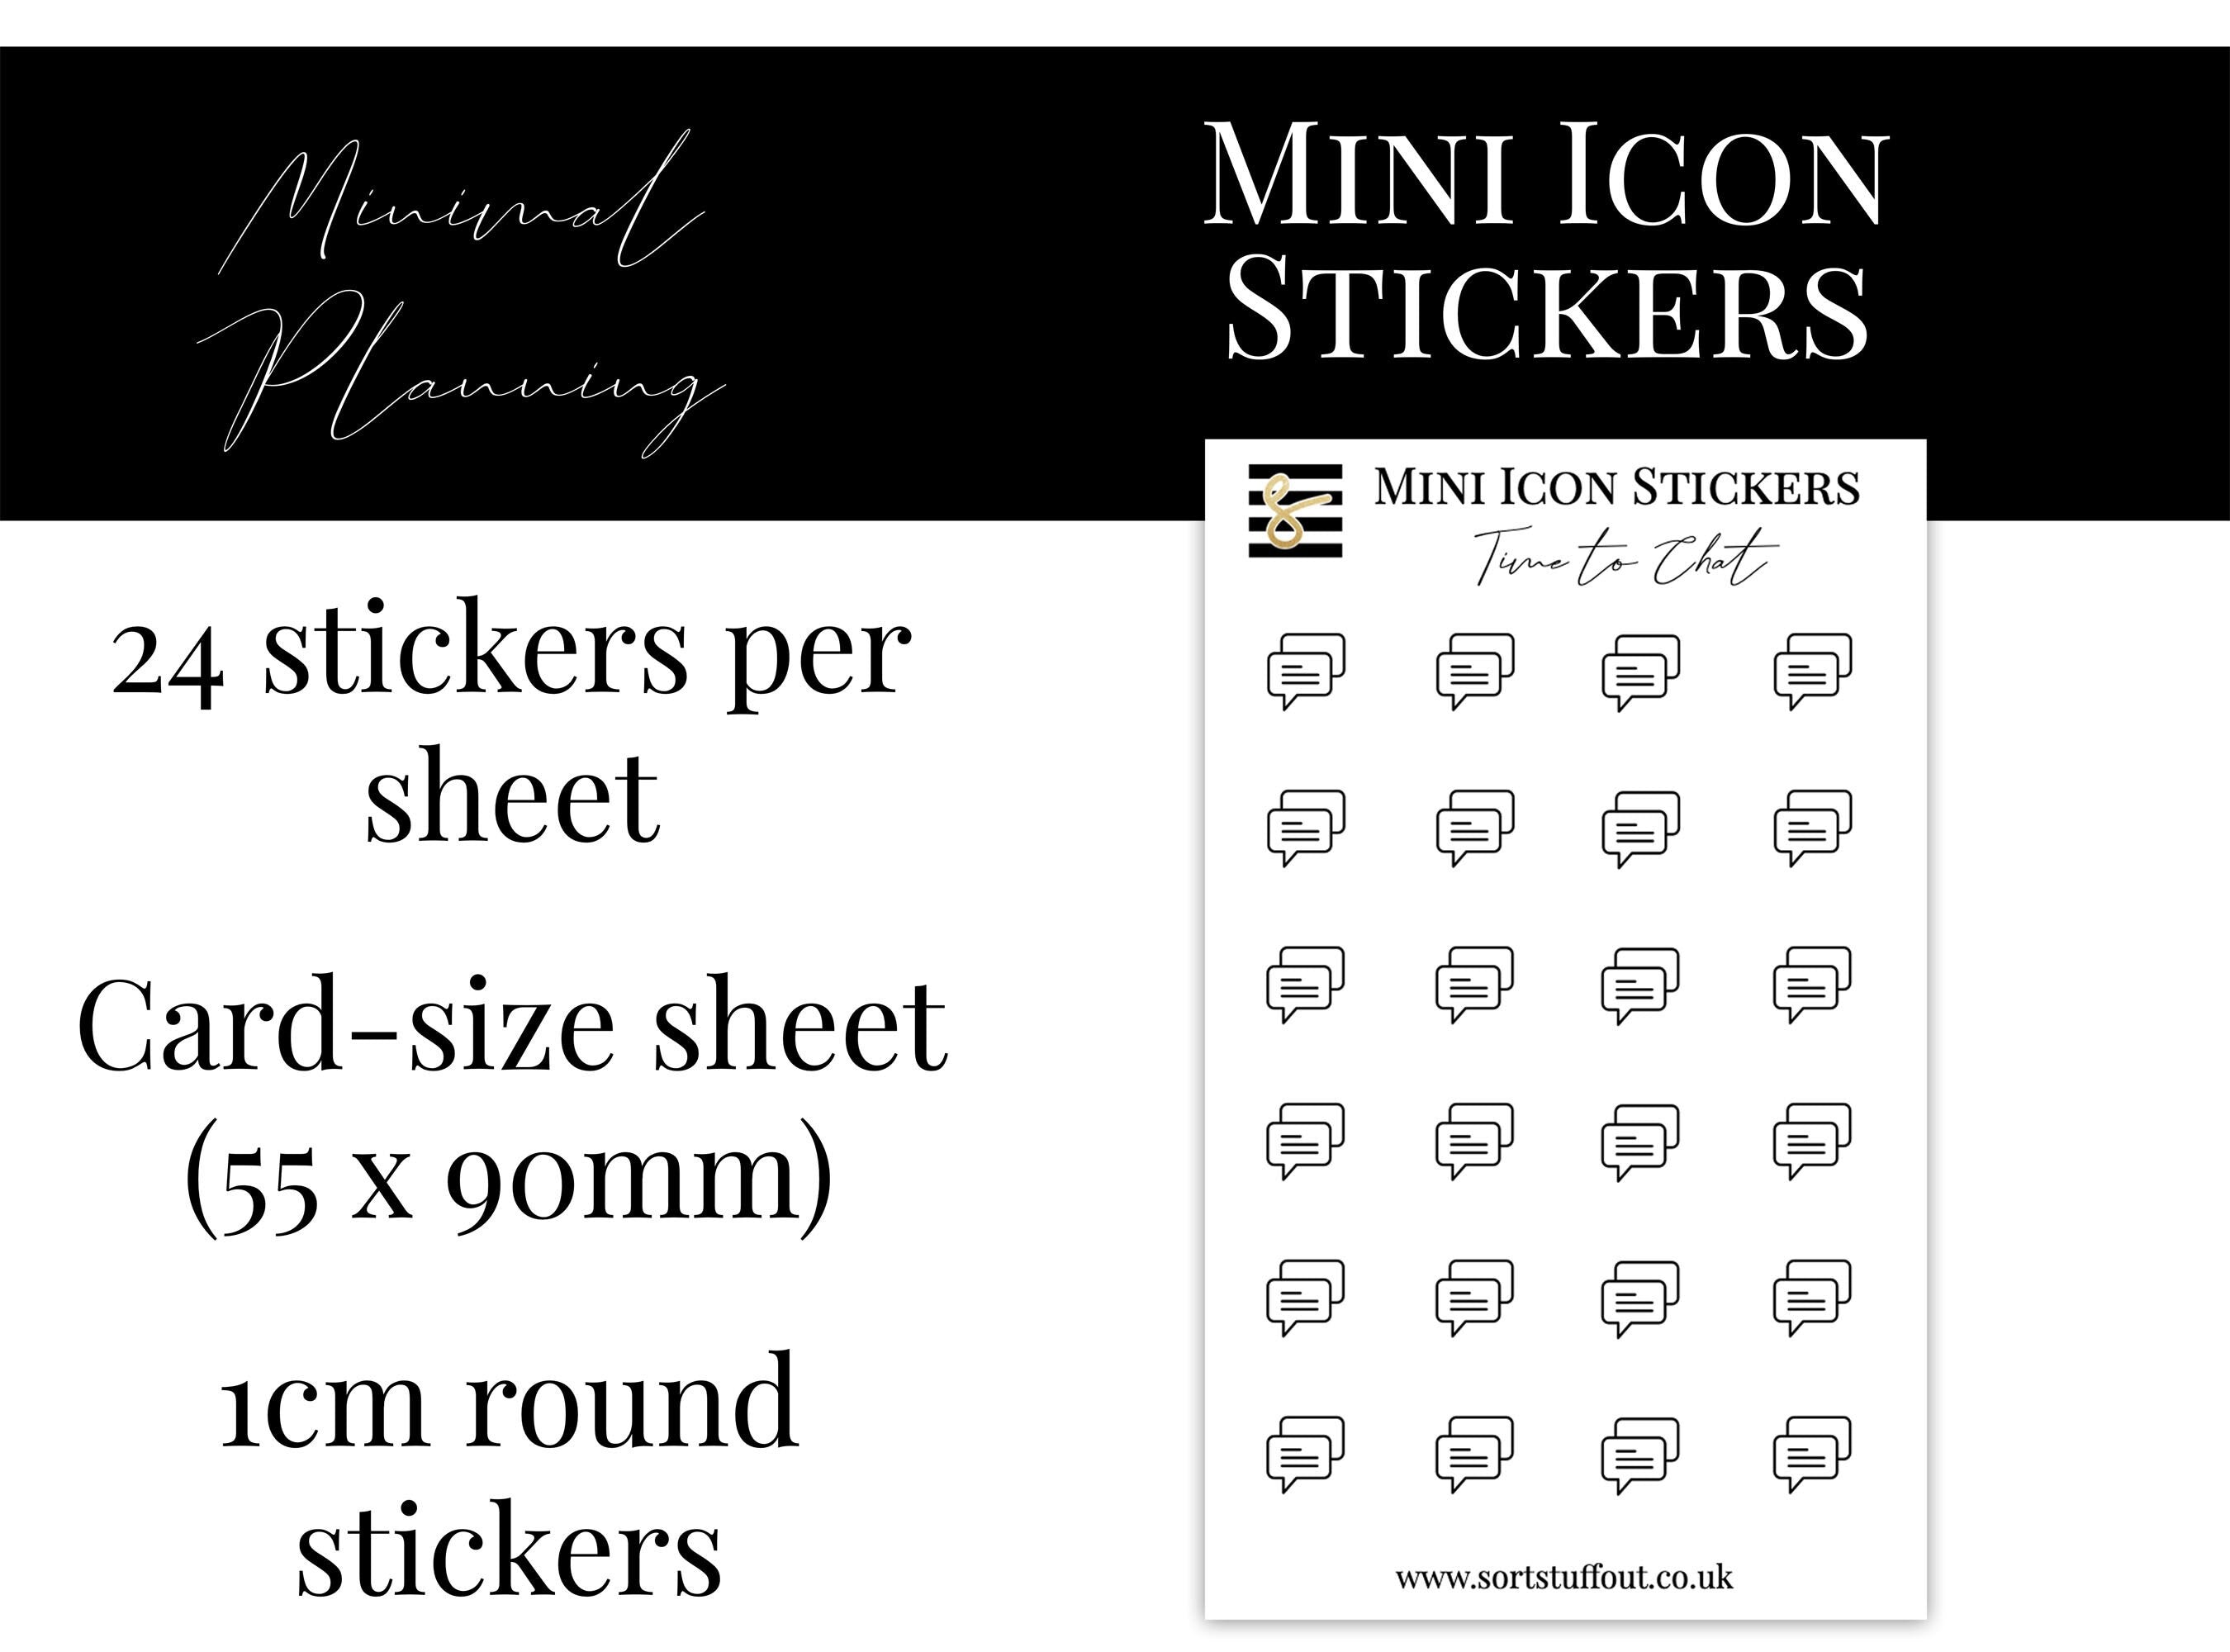 Mini Icon Stickers - Time to Chat